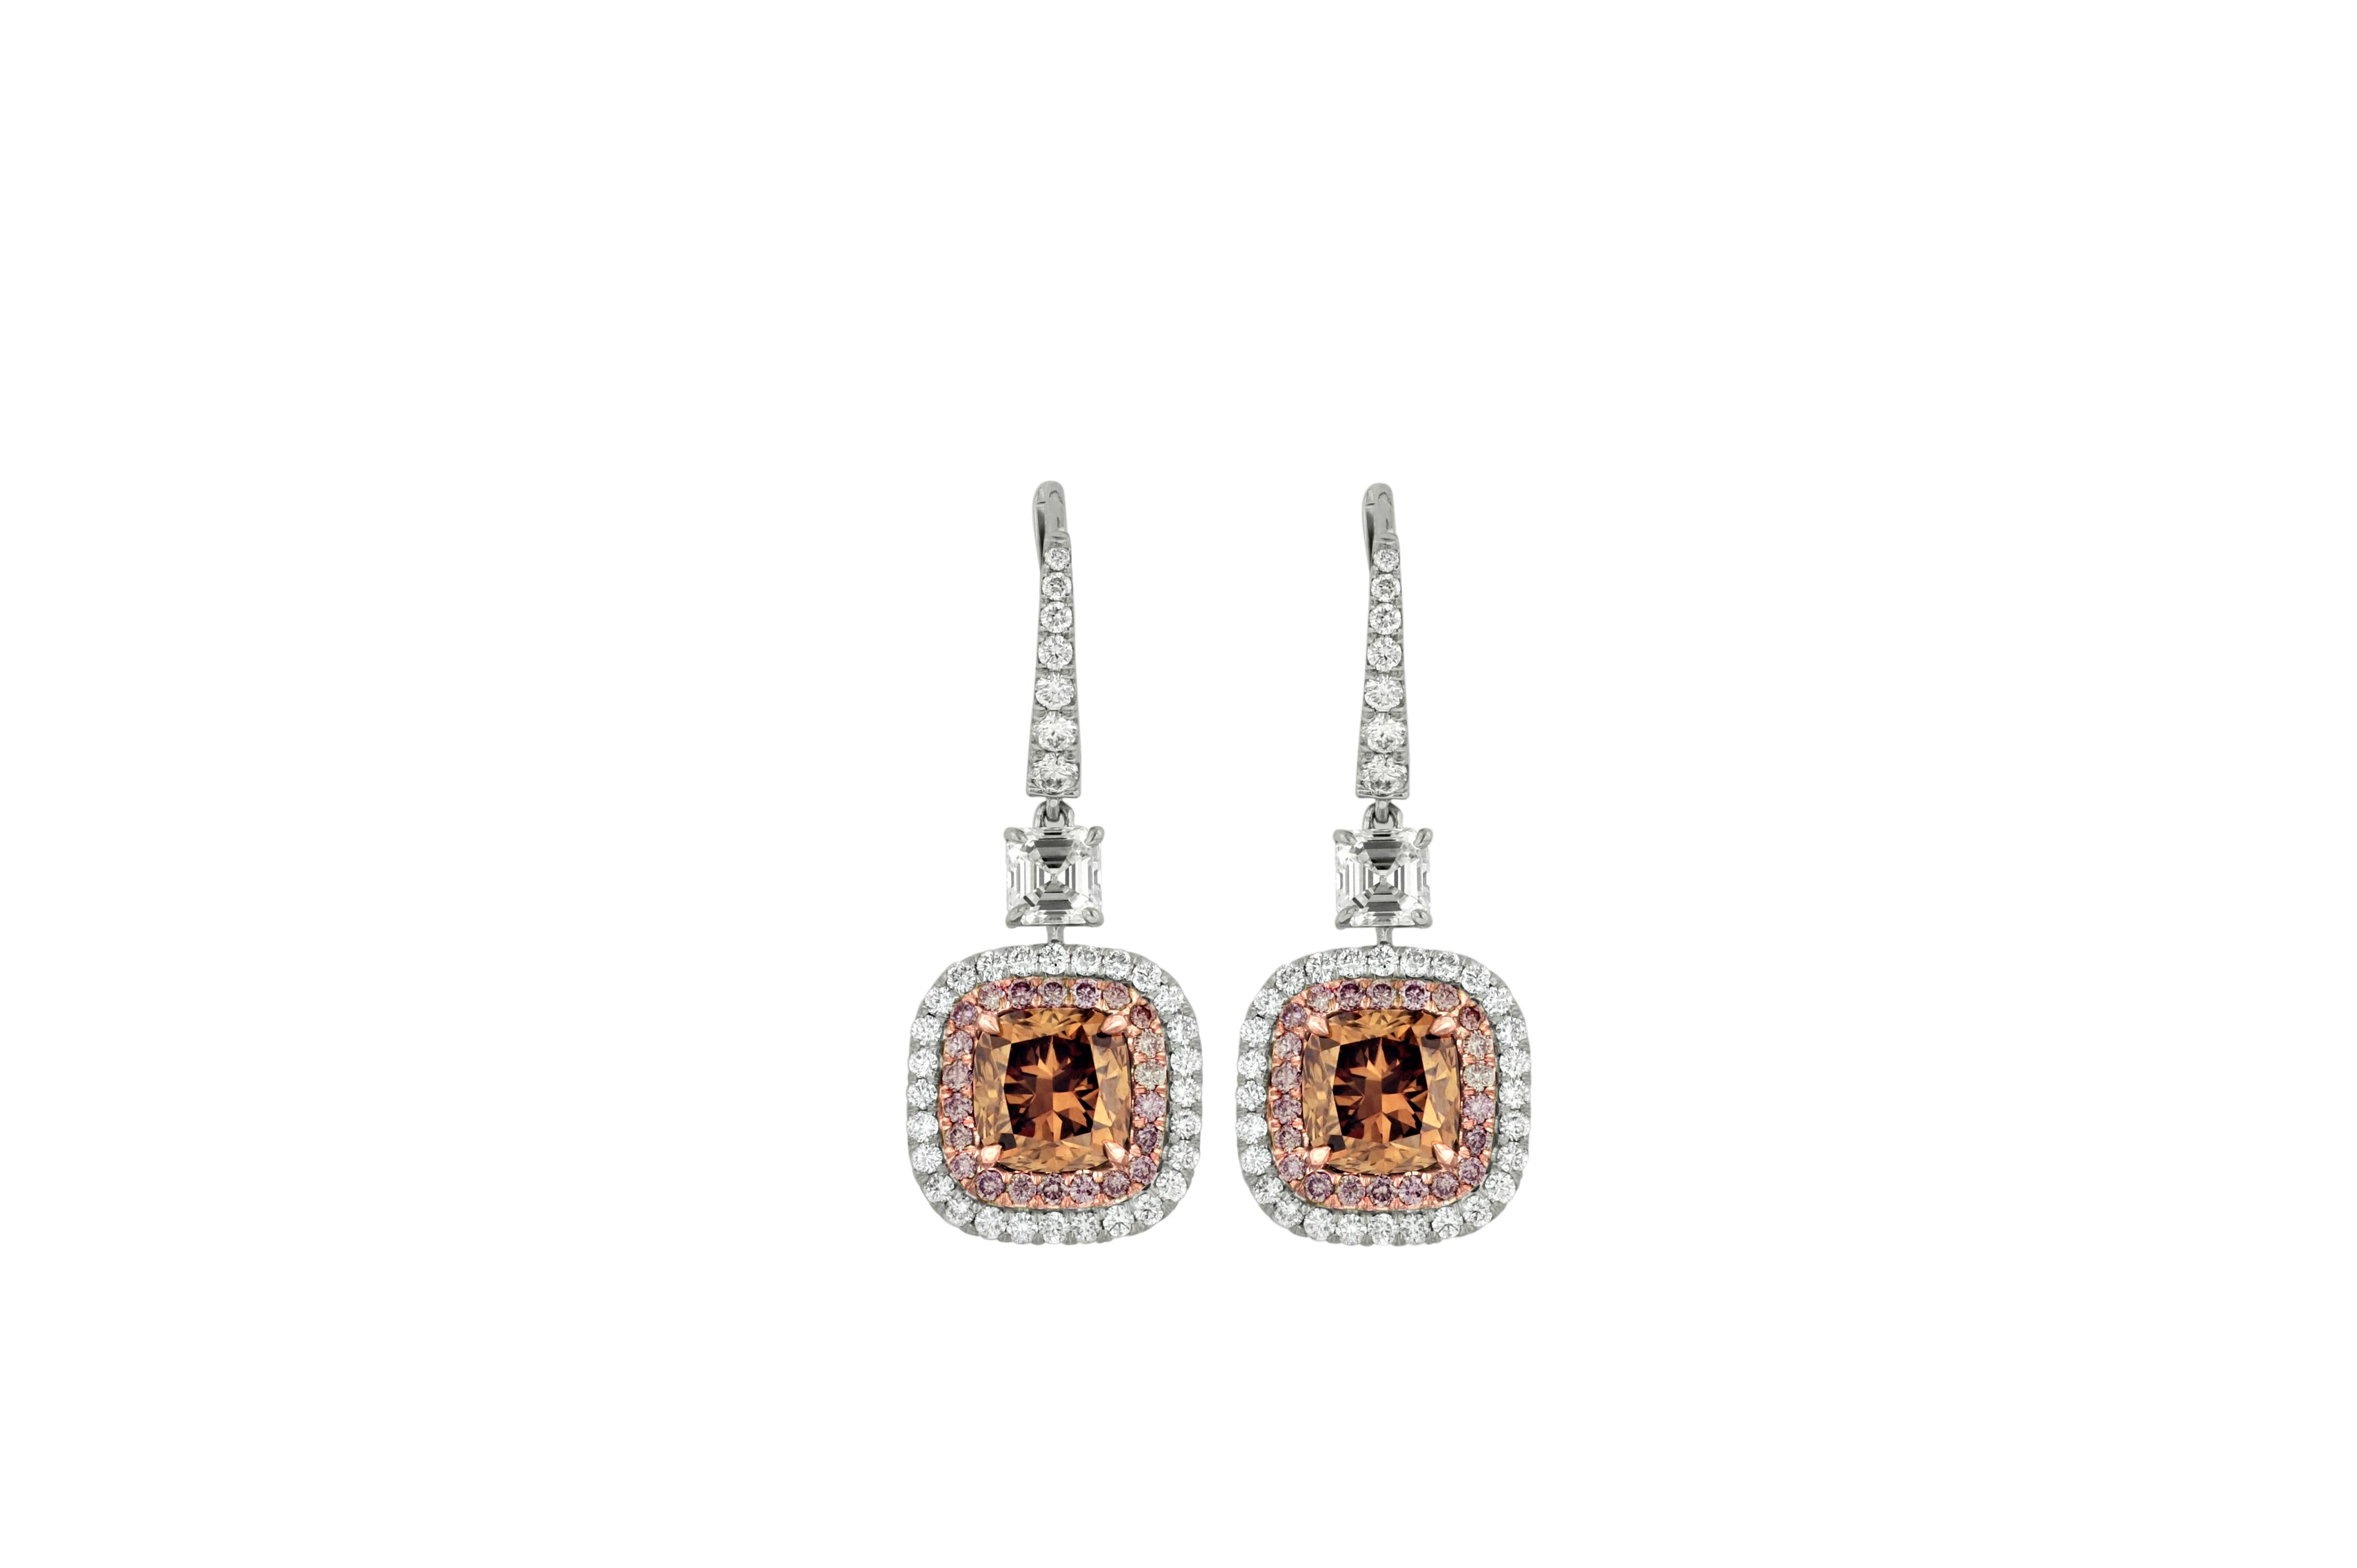 18kt white and rose gold gia certified fancy brownish diamond earrings, features 4.09 fyb (2.01 fb si2 radc949 & 2.08 fb vs1 radc950) set in halo setting with 2.35ct of white and pink diamonds. 
